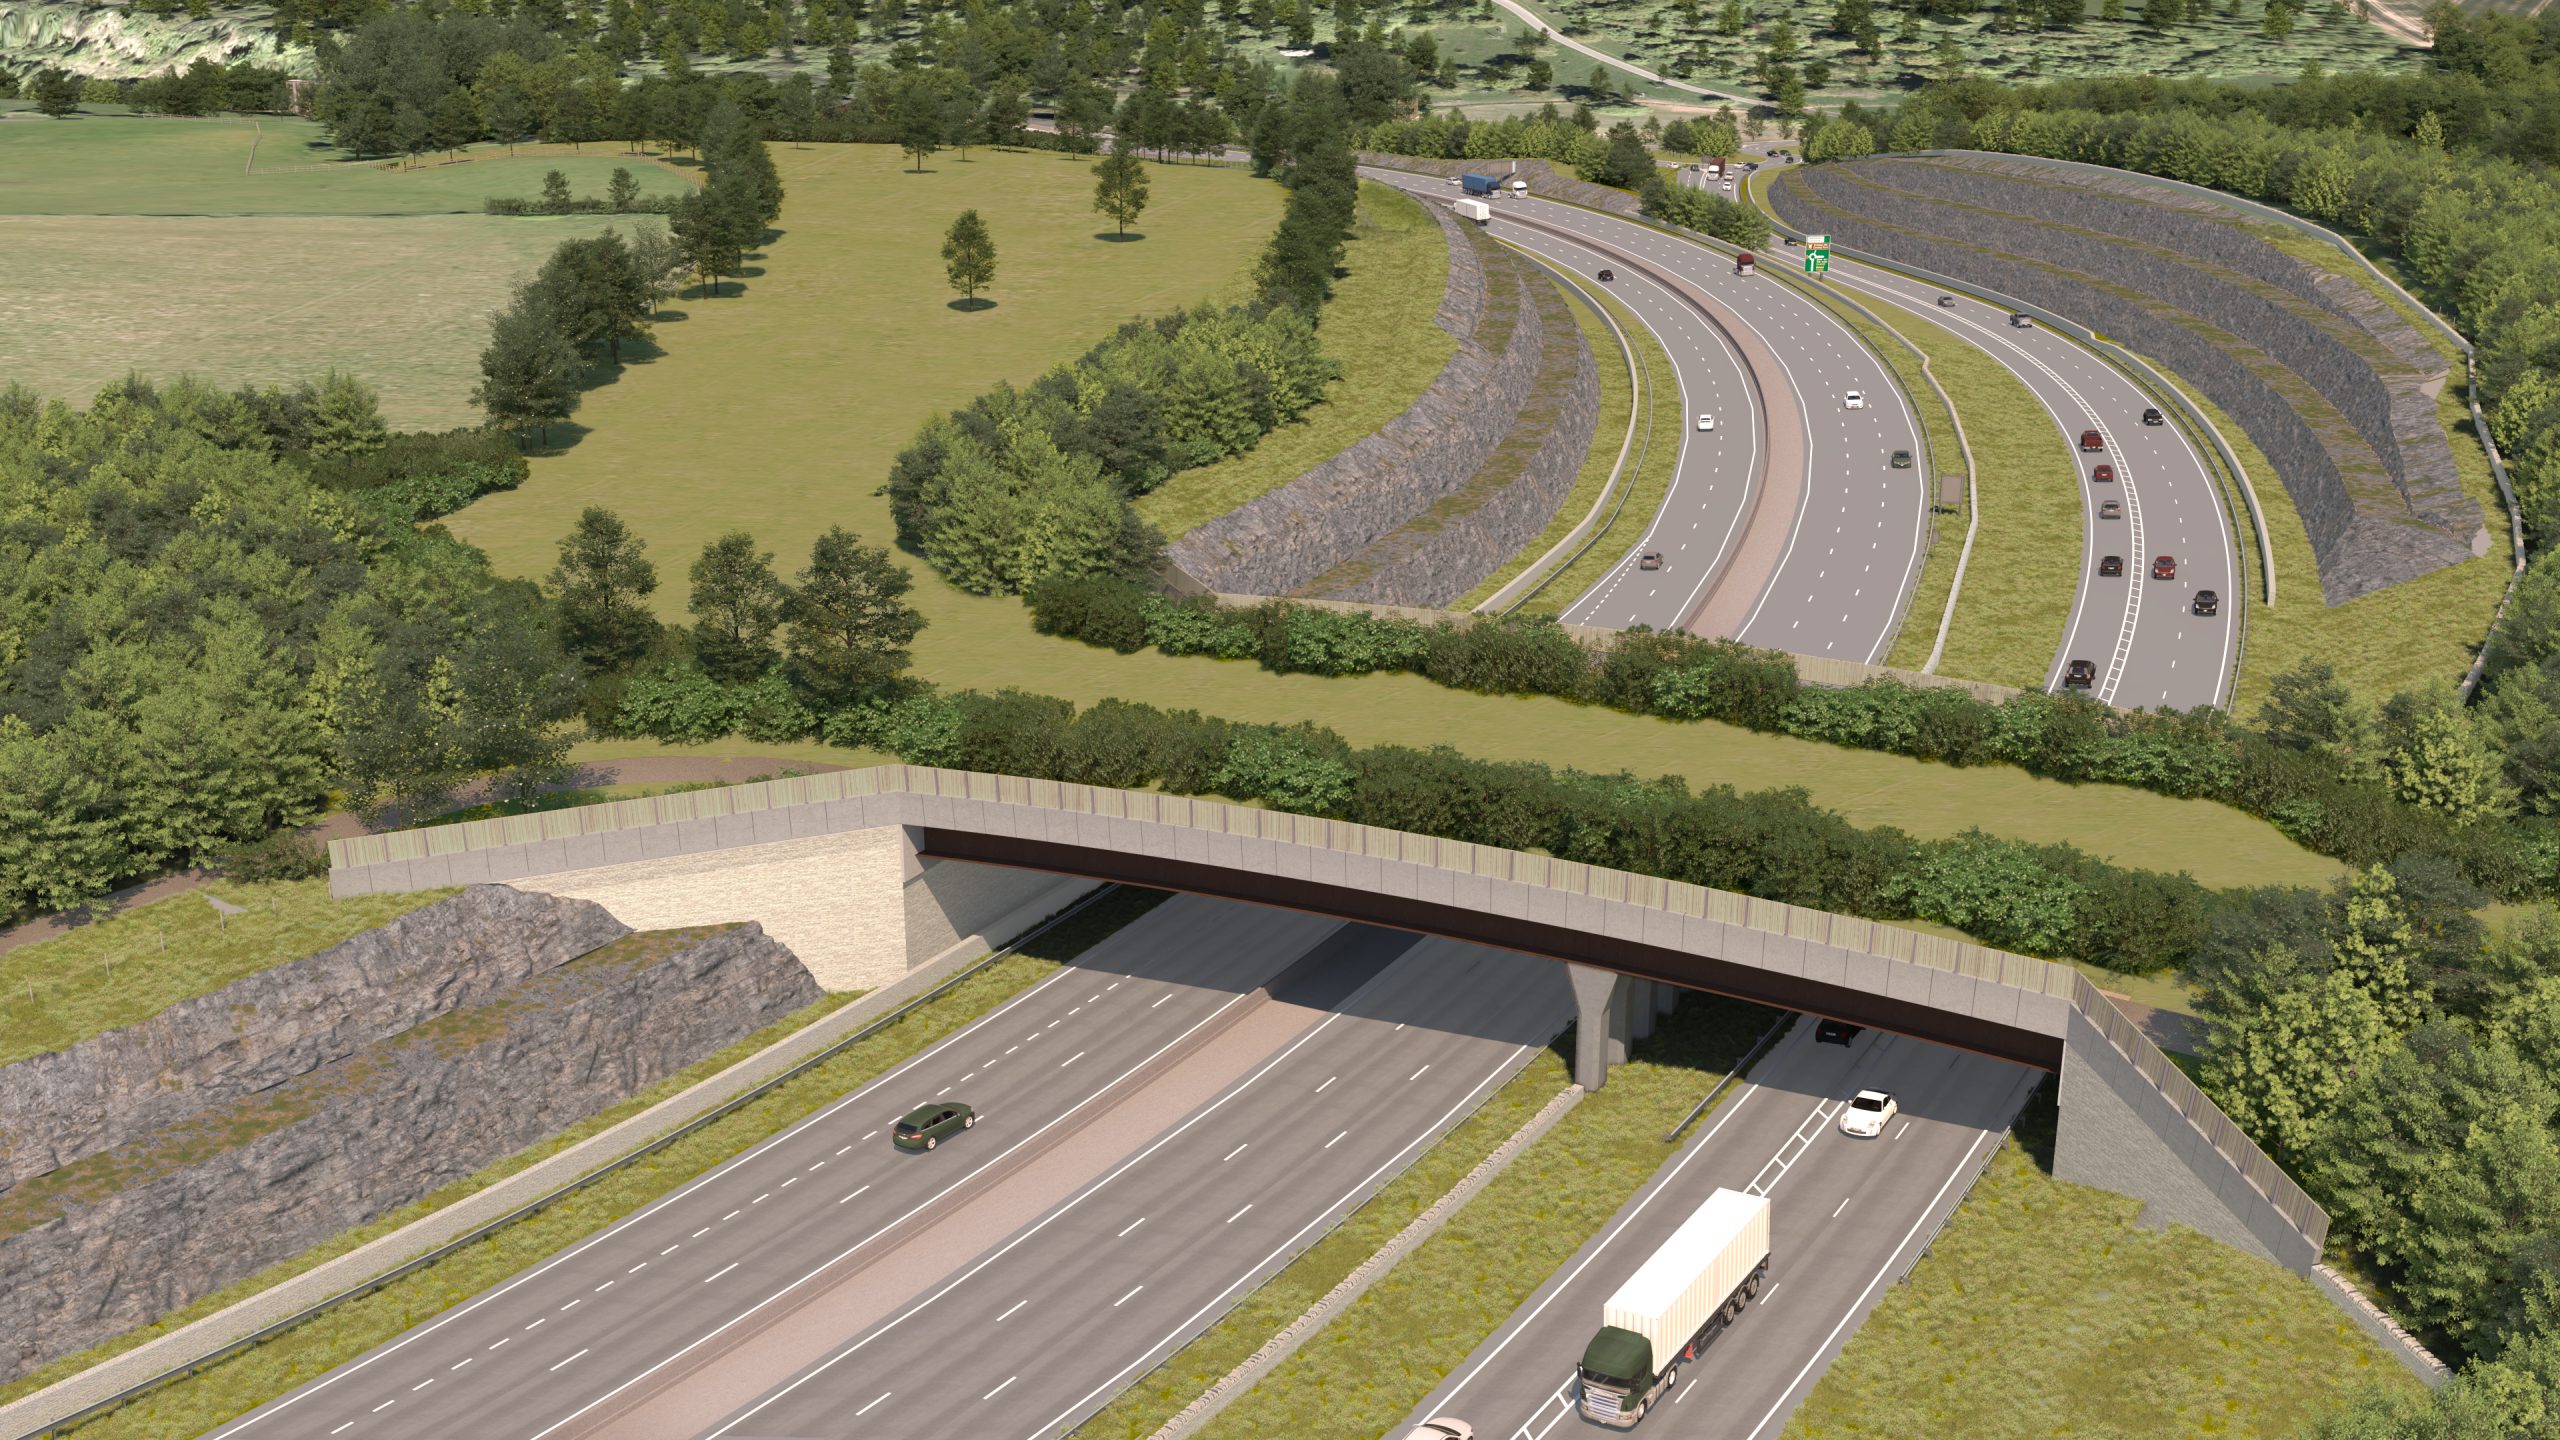 NEWS | More than £400 million to be spent upgrading the A417 between Gloucester and Swindon